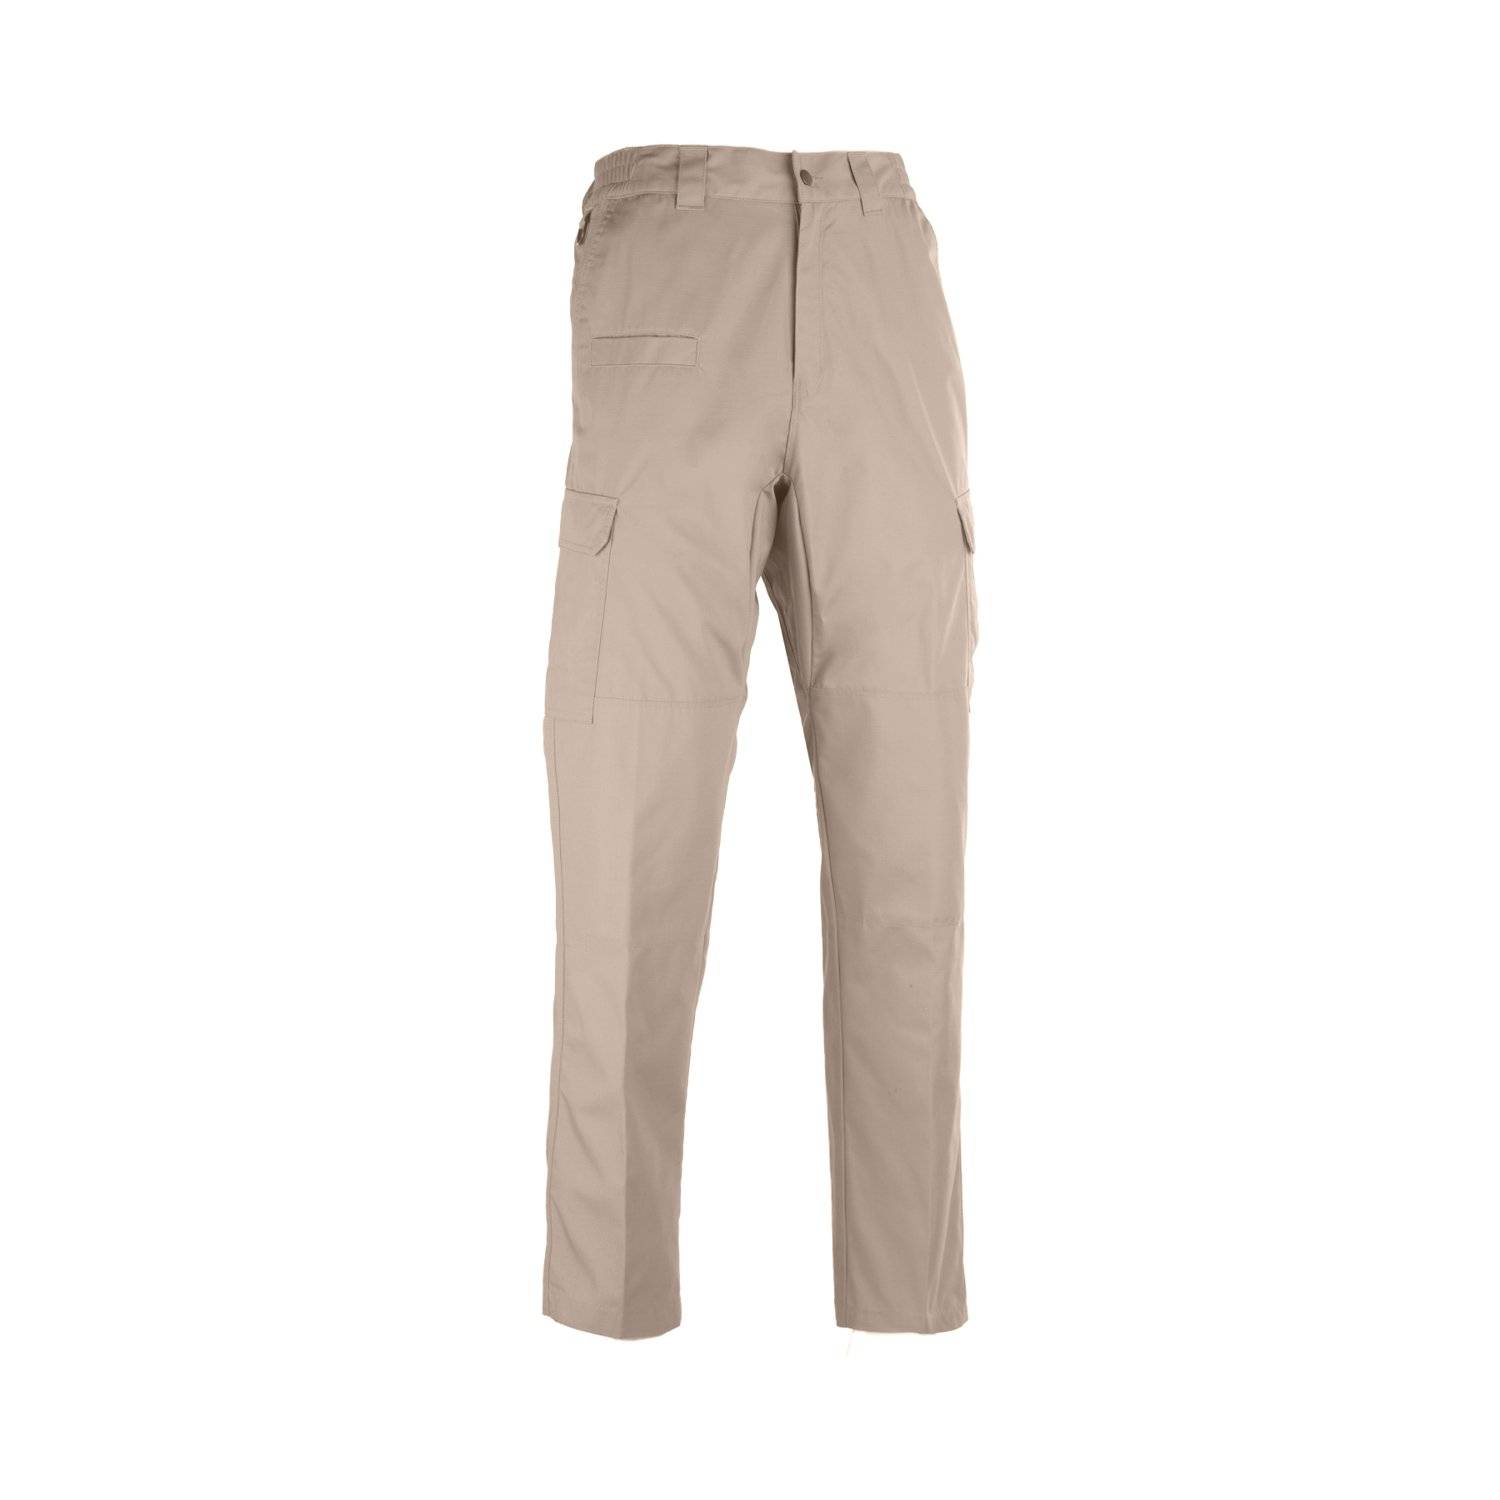 New Men's Casual Short Solid Color 100% Cotton Casual Beach Cargo Pants  Straight Short Pants 2813# - Stella's Fashion